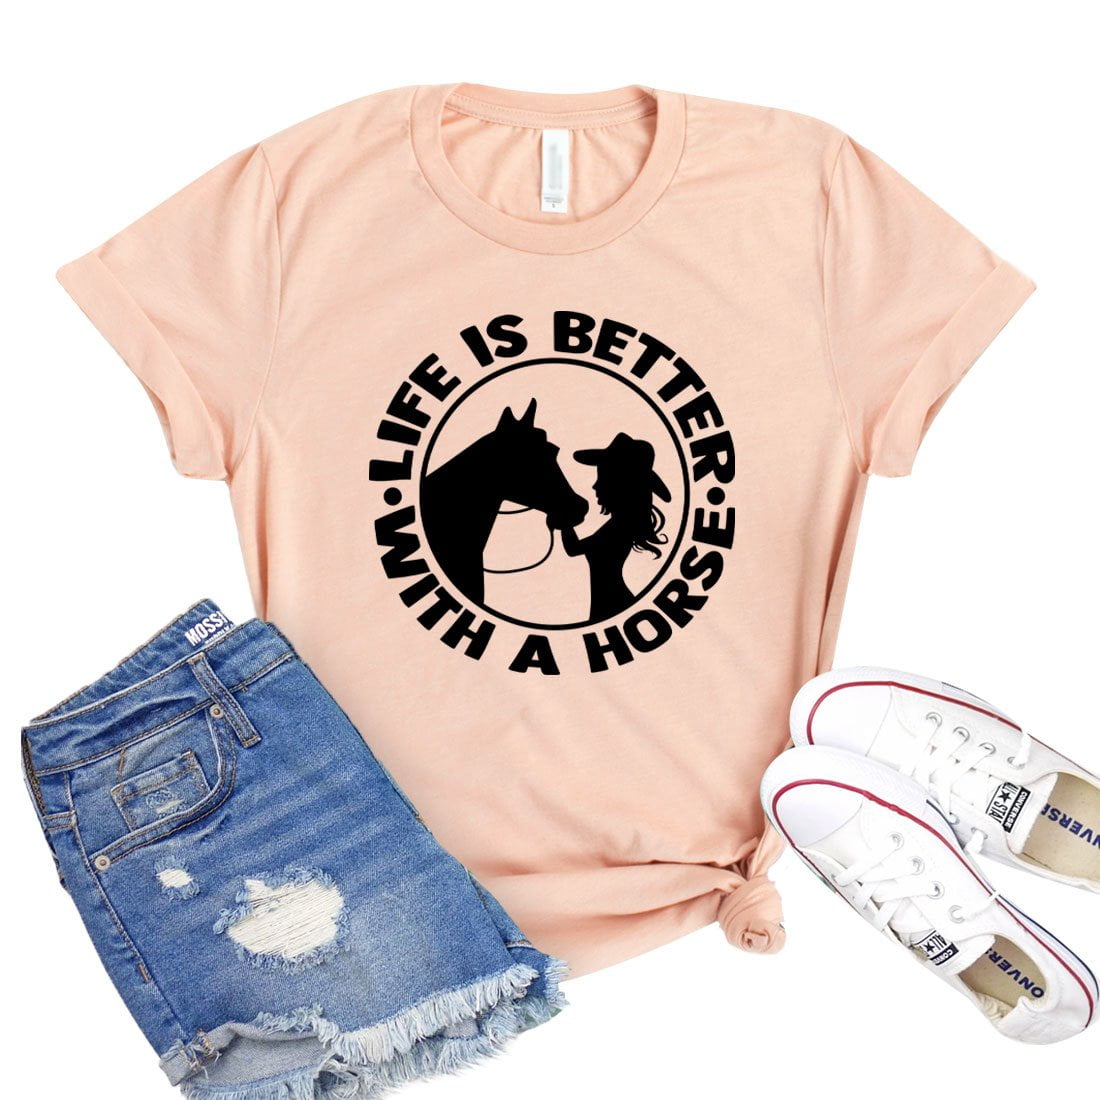 Head Up Heels Down shirt Equestrian Horse Riding Shirt Horse Rider Horse Shirt Girls Horse Shirt Pony Tee mothers day